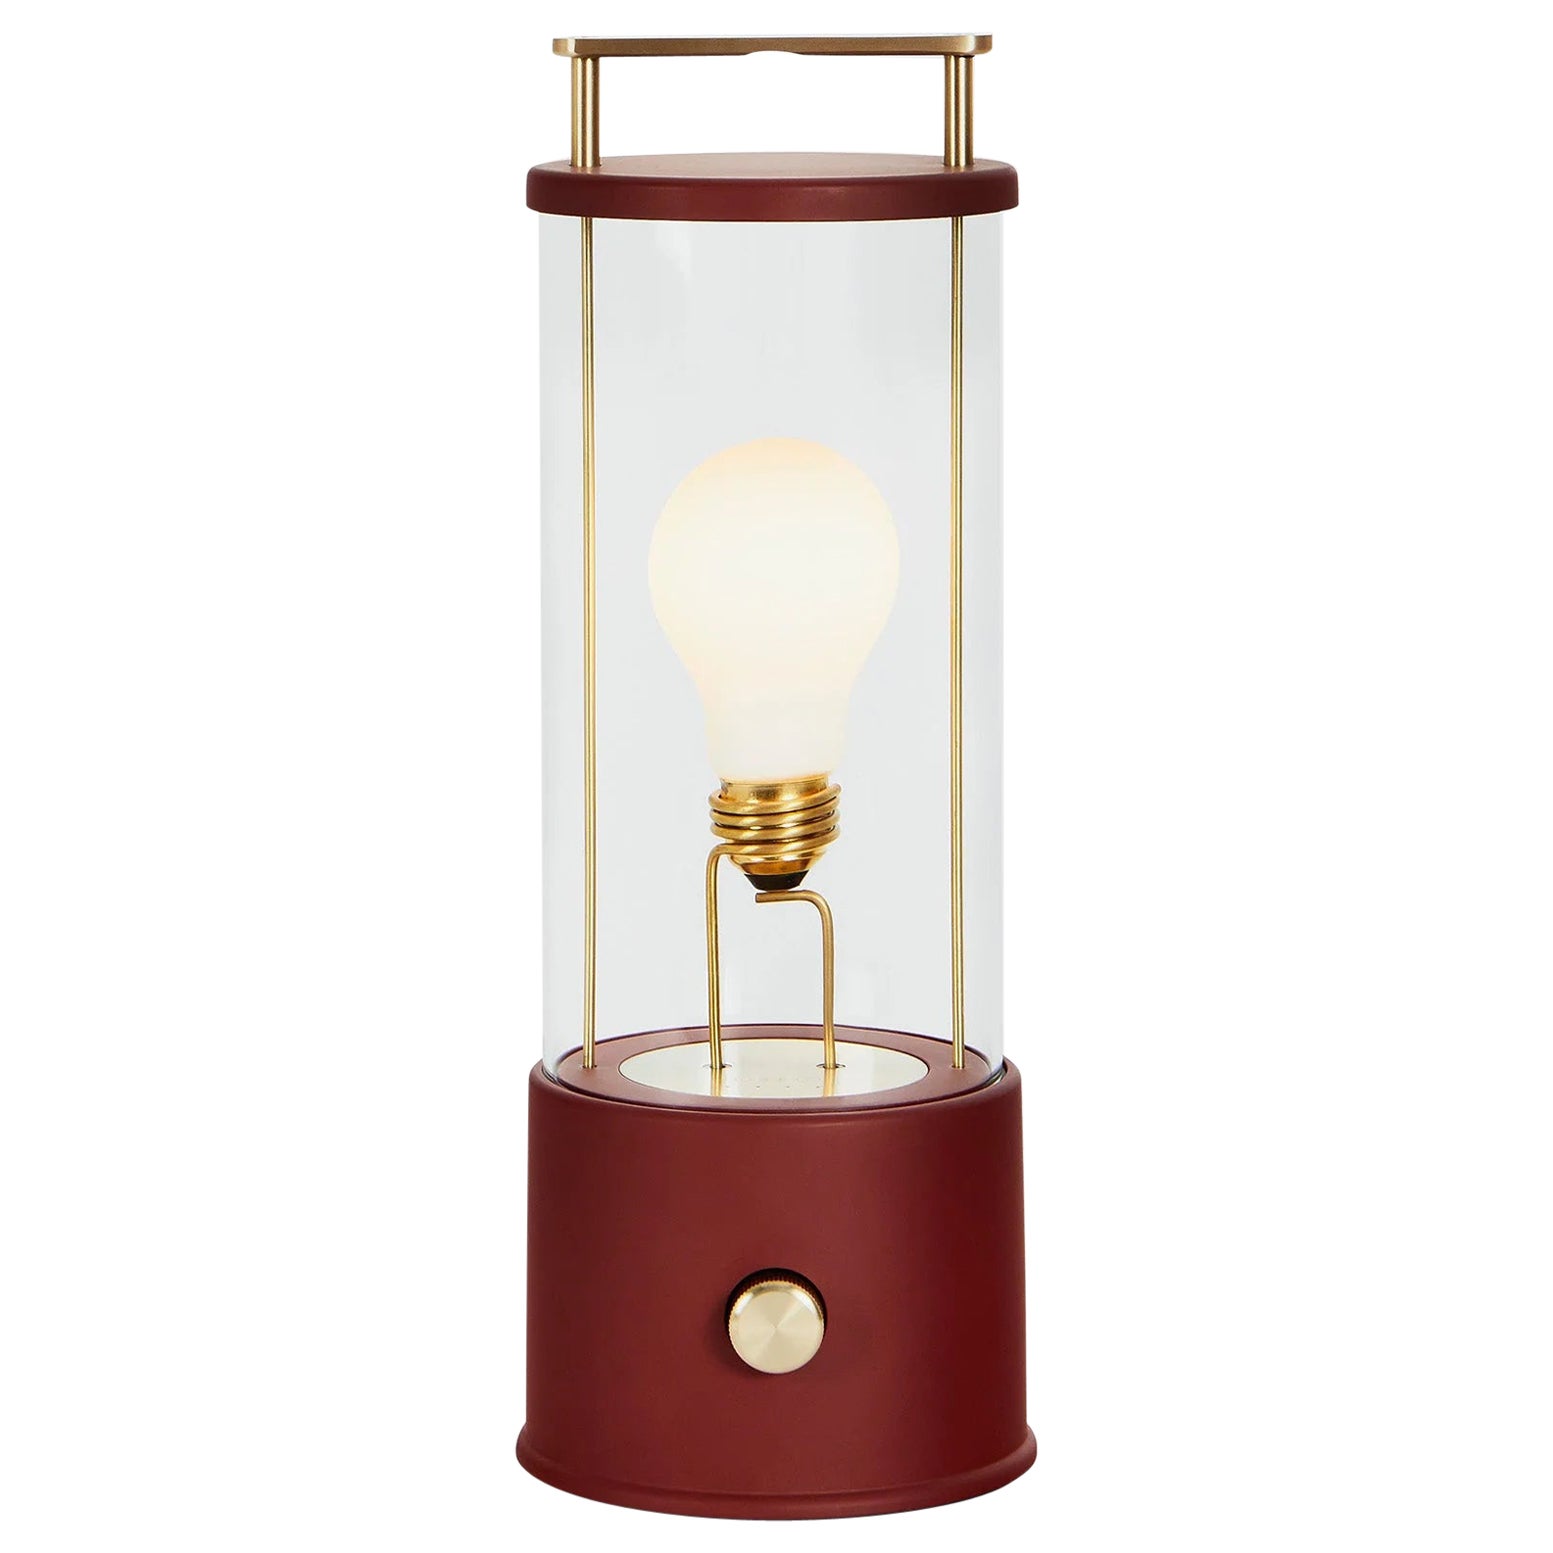 'The Muse' Portable Lamp by Farrow & Ball x Tala in Pomona Red